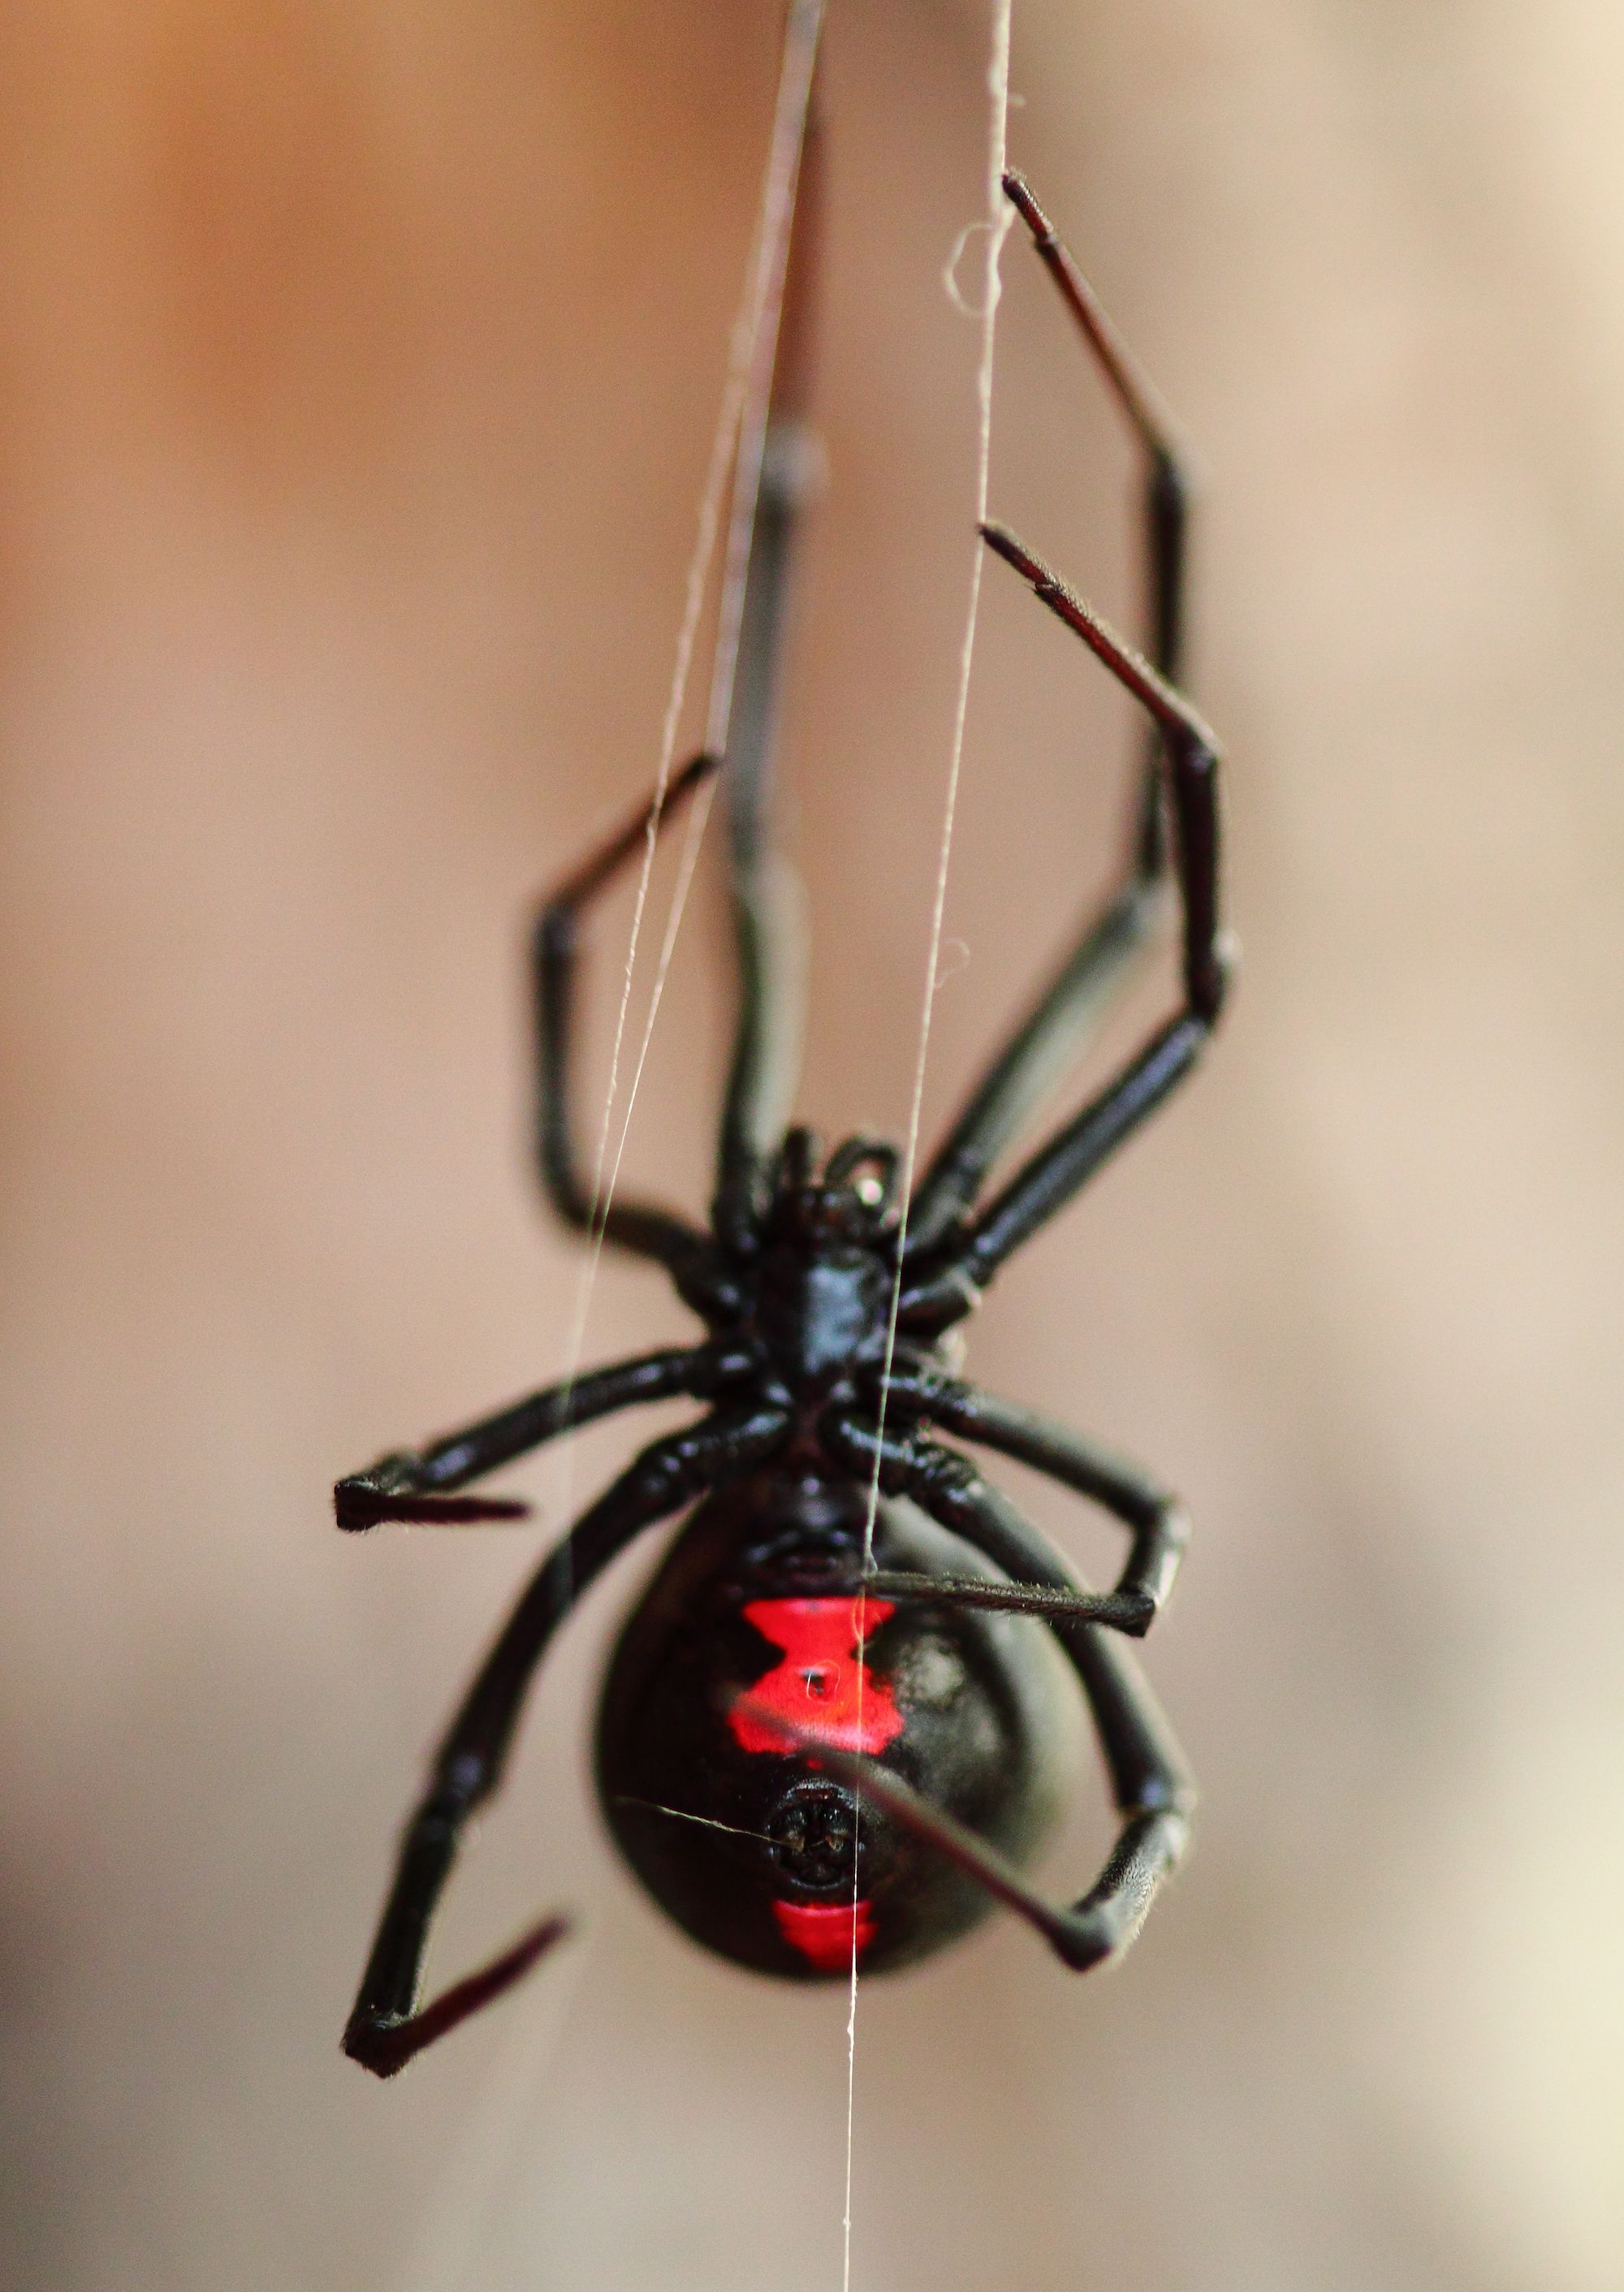 How To Get Rid Of Black Widows In Your Yard How To Care For A Pet